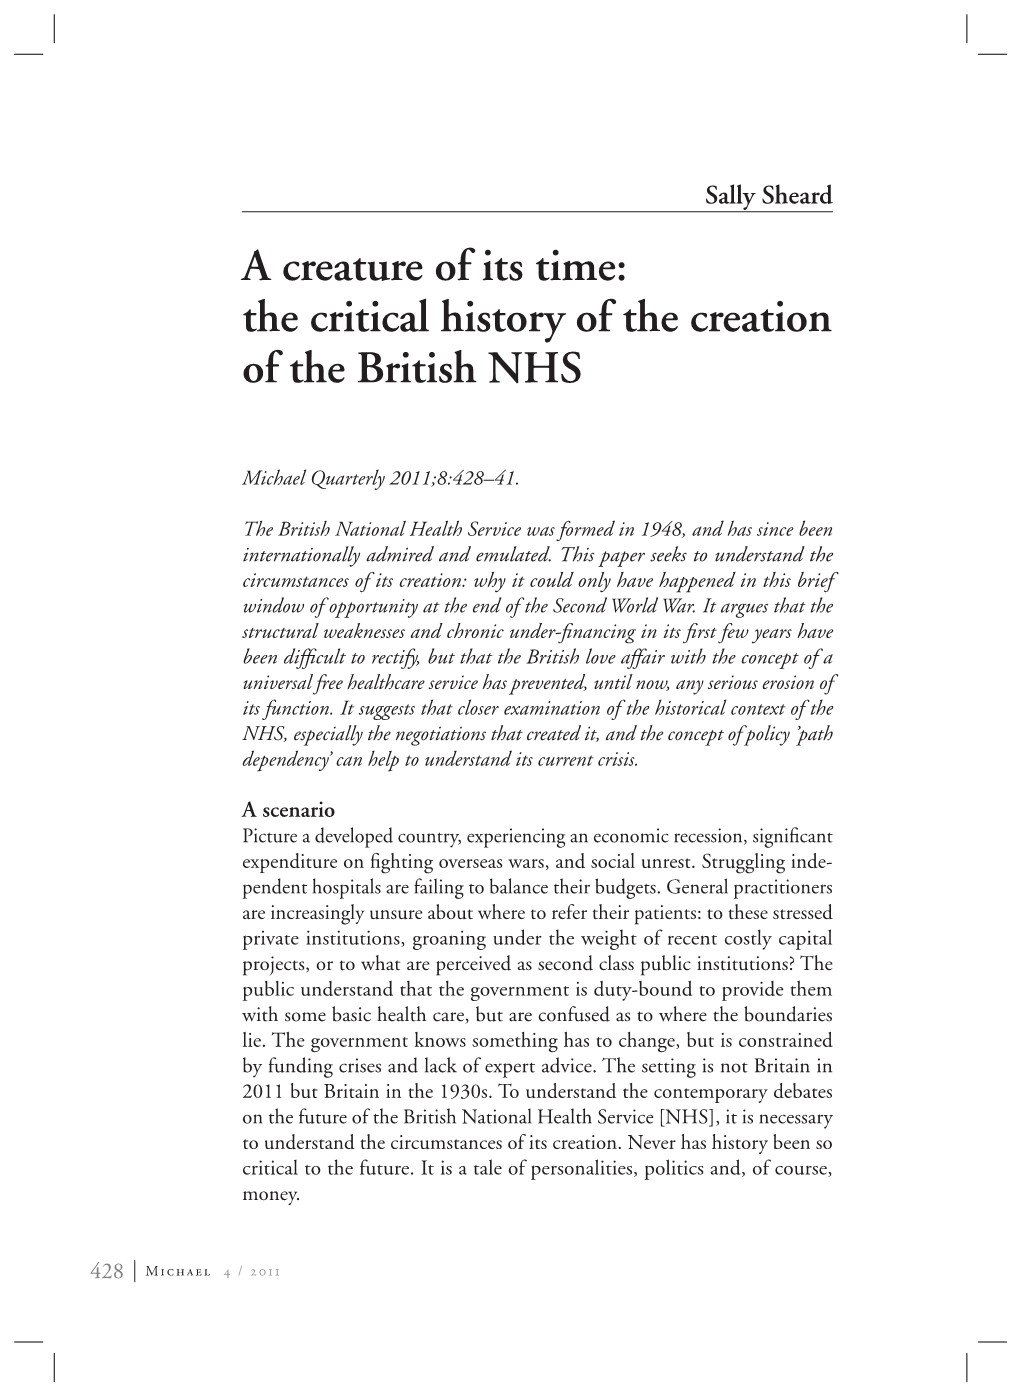 A Creature of Its Time: the Critical History of the Creation of the British NHS